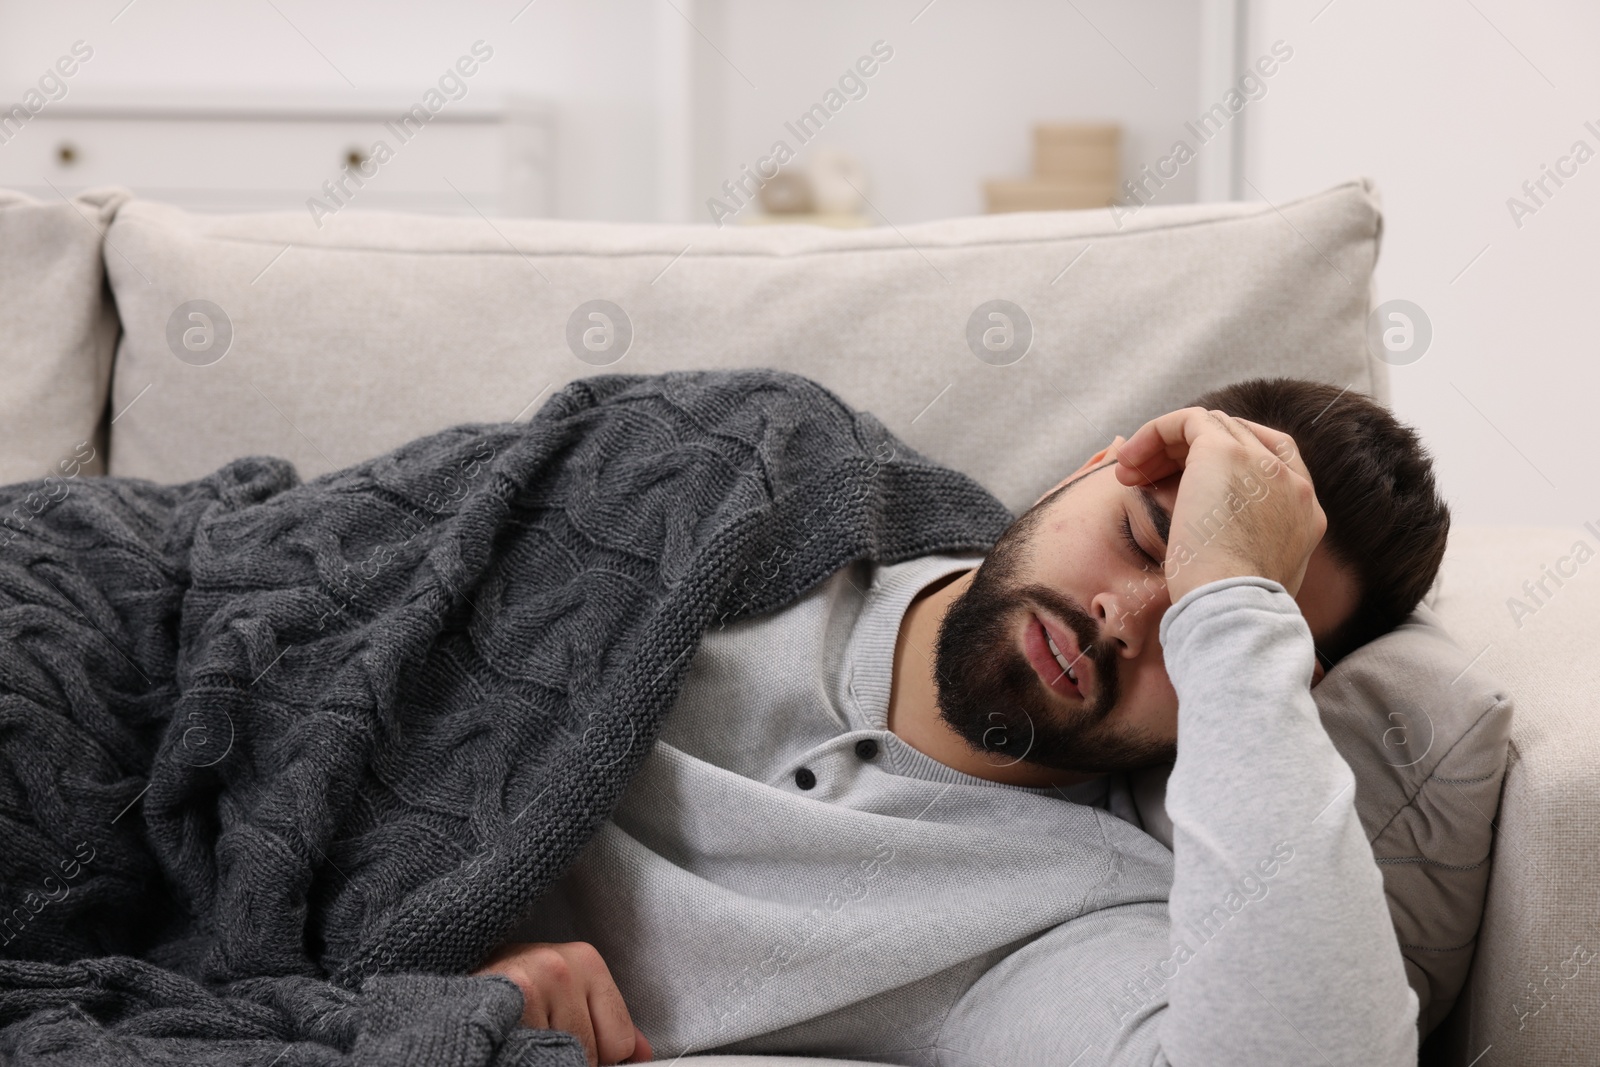 Photo of Man suffering from headache on sofa at home